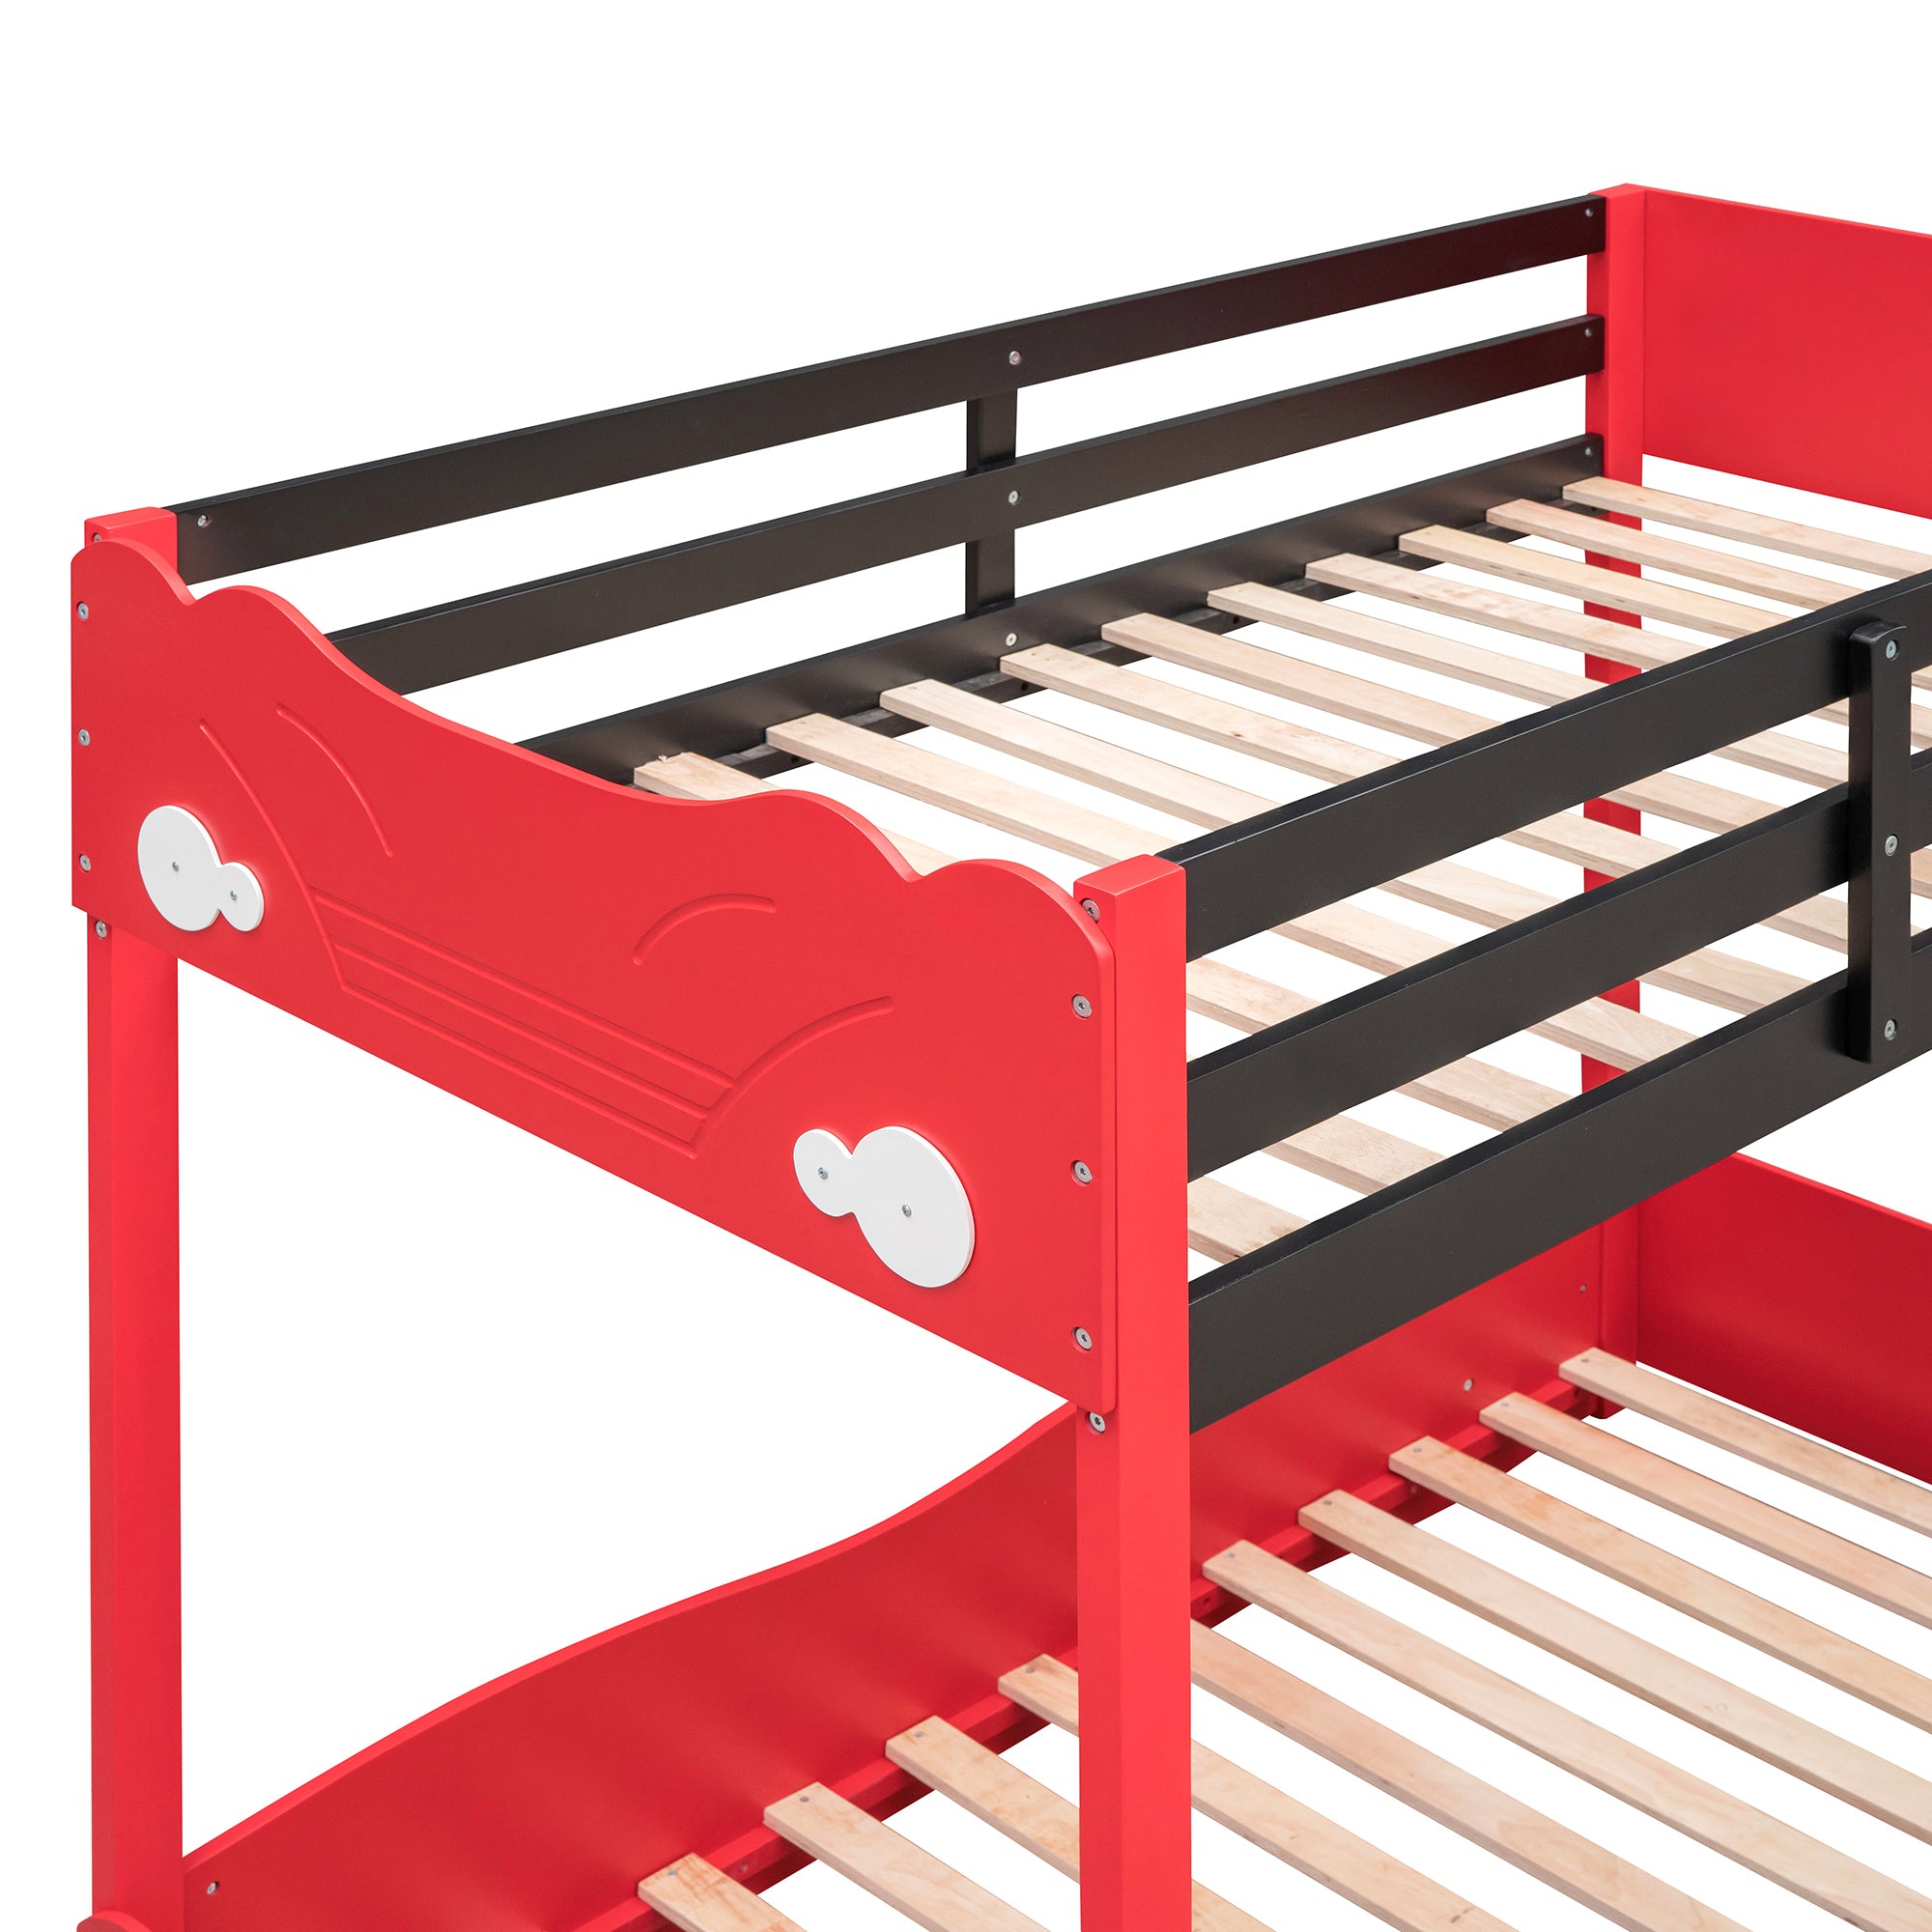 Twin Size Car-Shaped Bunk Bed with Wheels (Red)